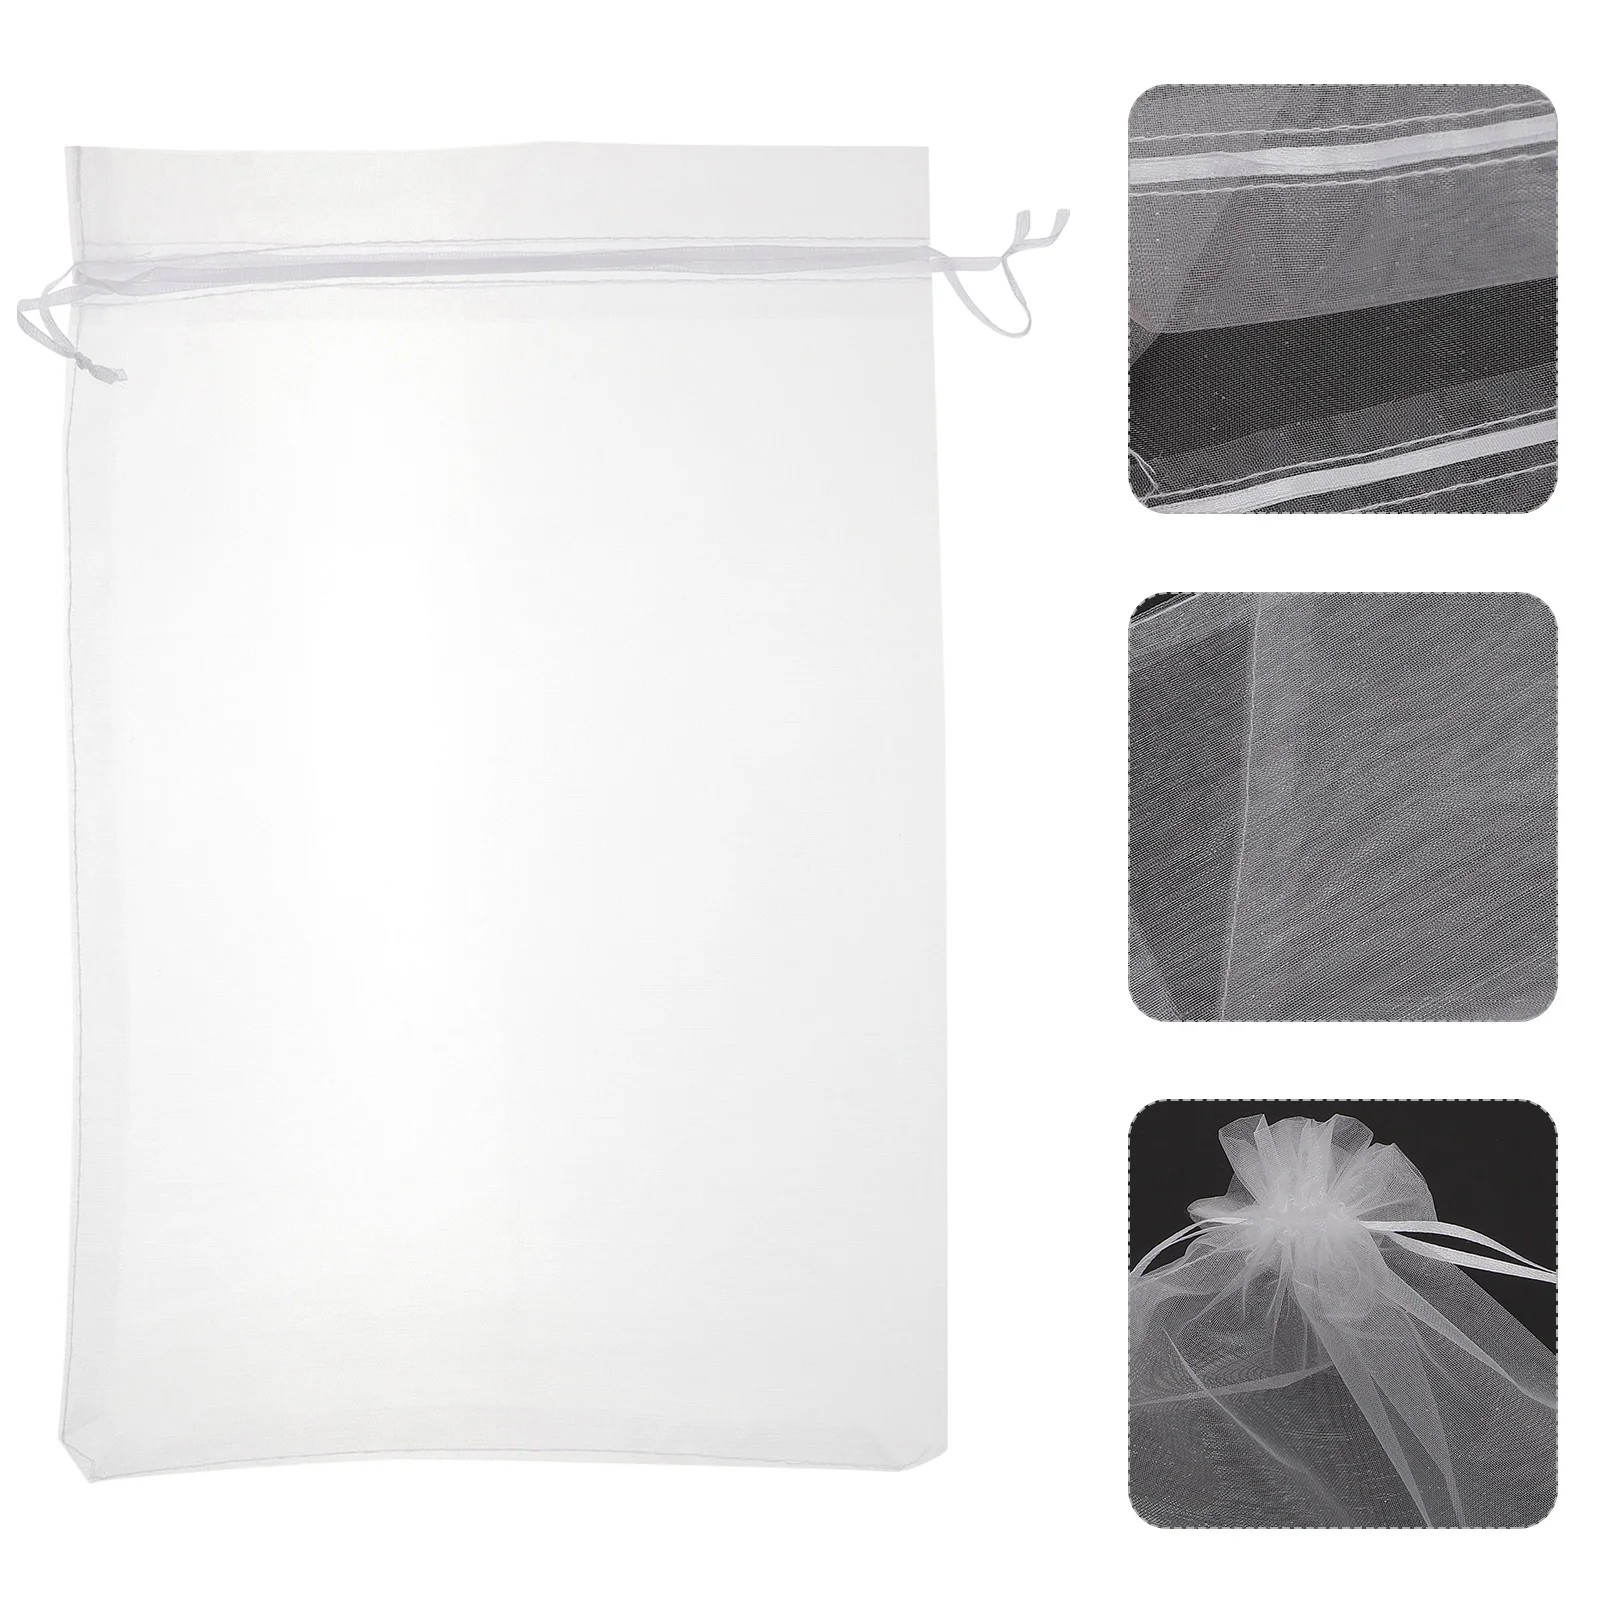 

Fruit Protection Netting Barrier Mesh Garden Covers Grape Mango Tree Tomato Insect Organza Protector Drawstring Bug Bird